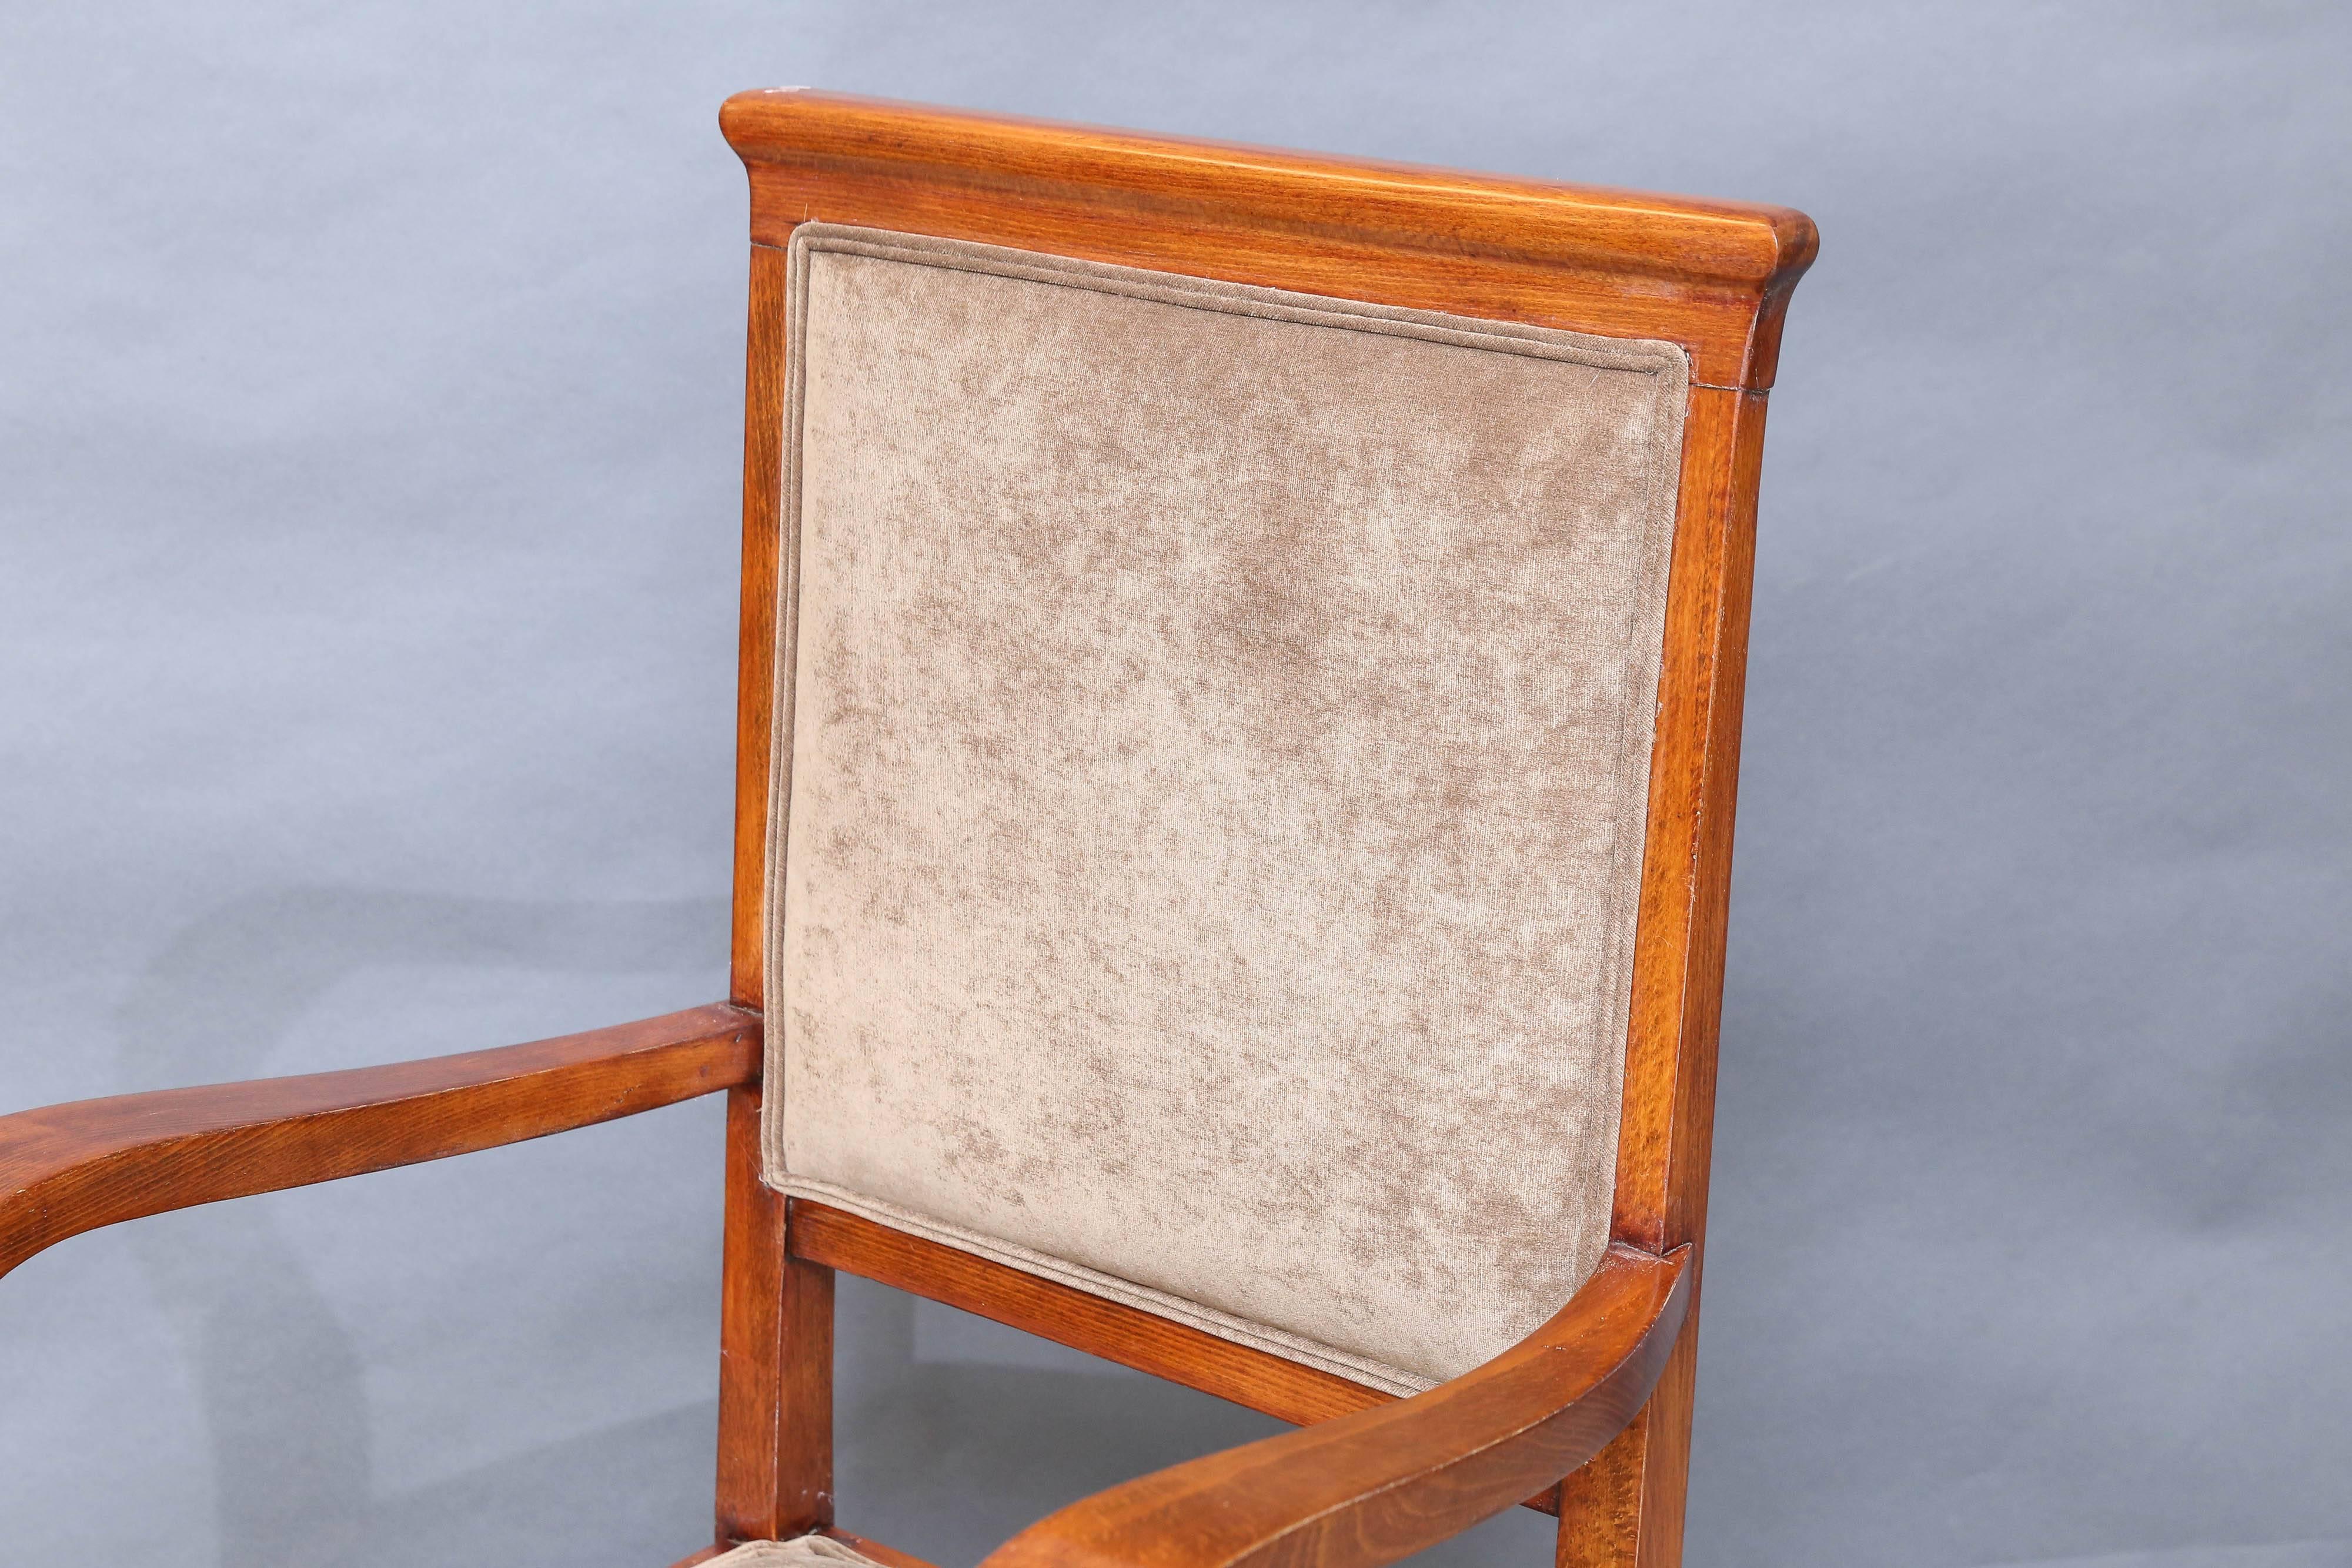 Chair is made out of high quality walnut wood. Back of the chair and seat are newly re-upholstered in a light brown fabric. Back and seat are connected with curved armrests. 
Condition is perfect. Restored. 

Hungary, circa 1930s
 Measure: 23